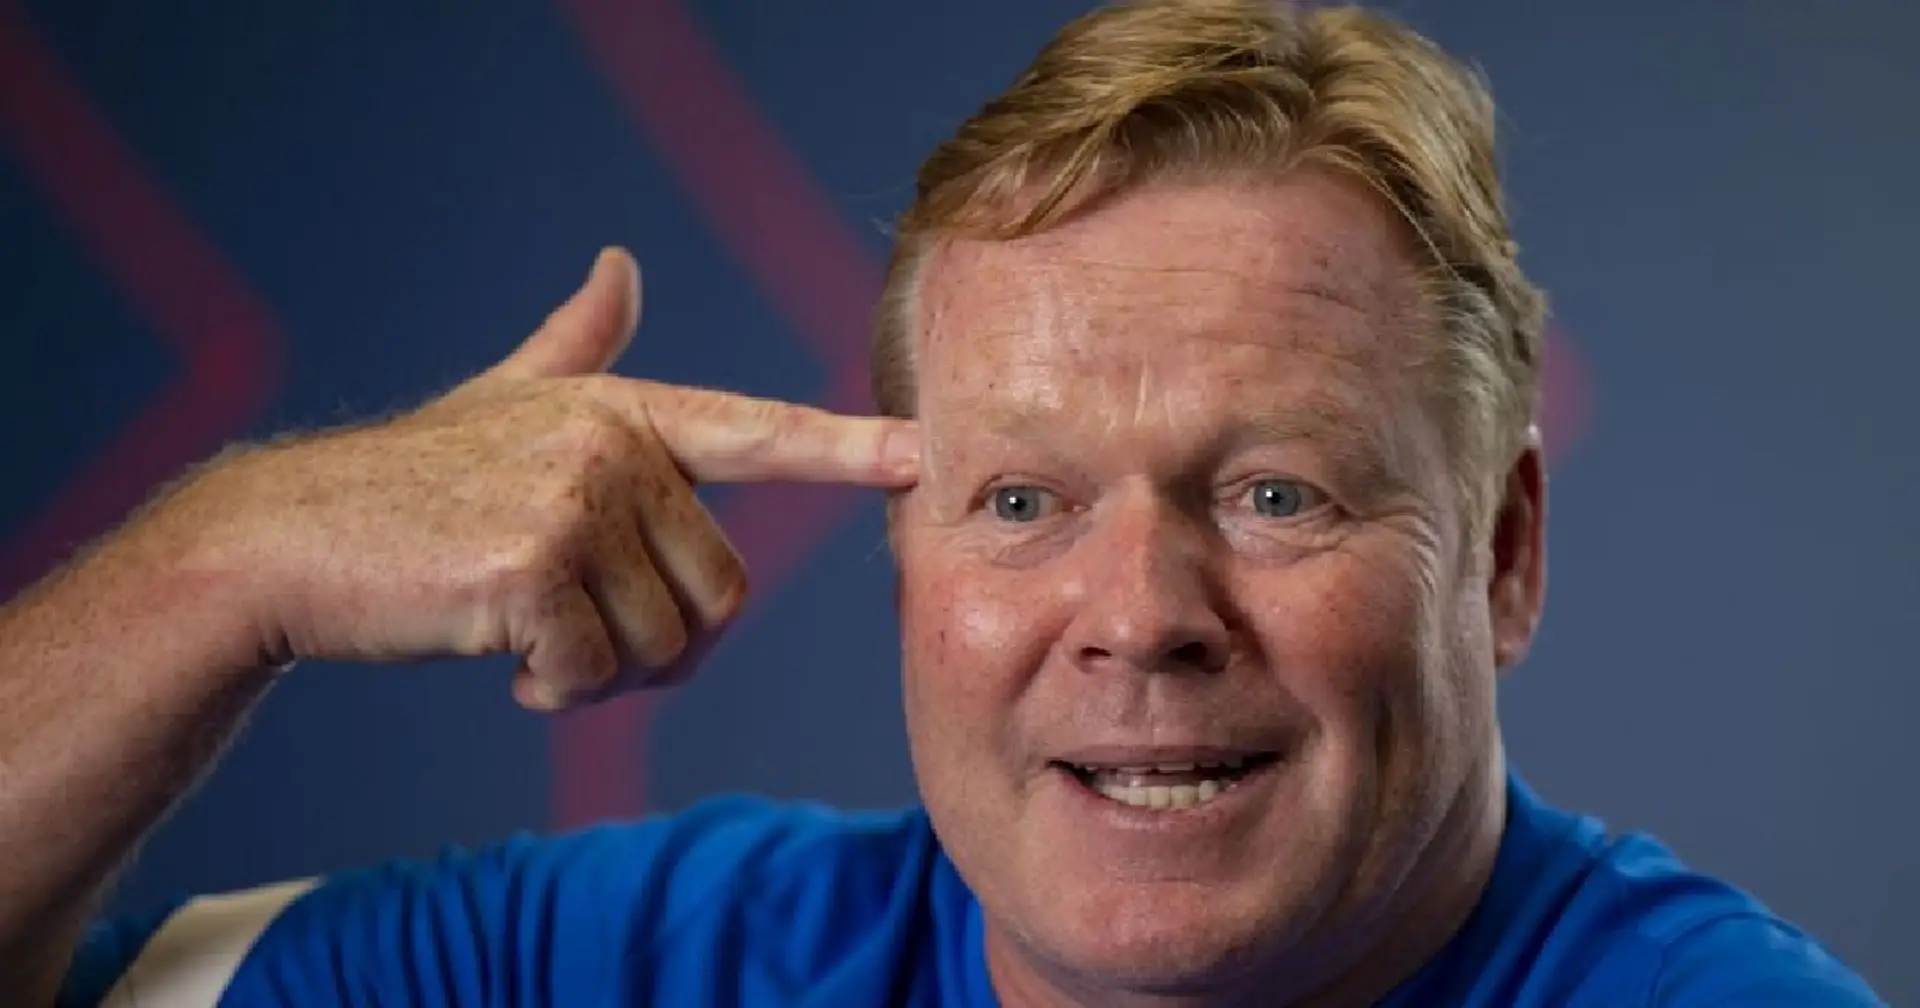 Key dates, potential replacements & more: Everything we know about Koeman's likely sacking